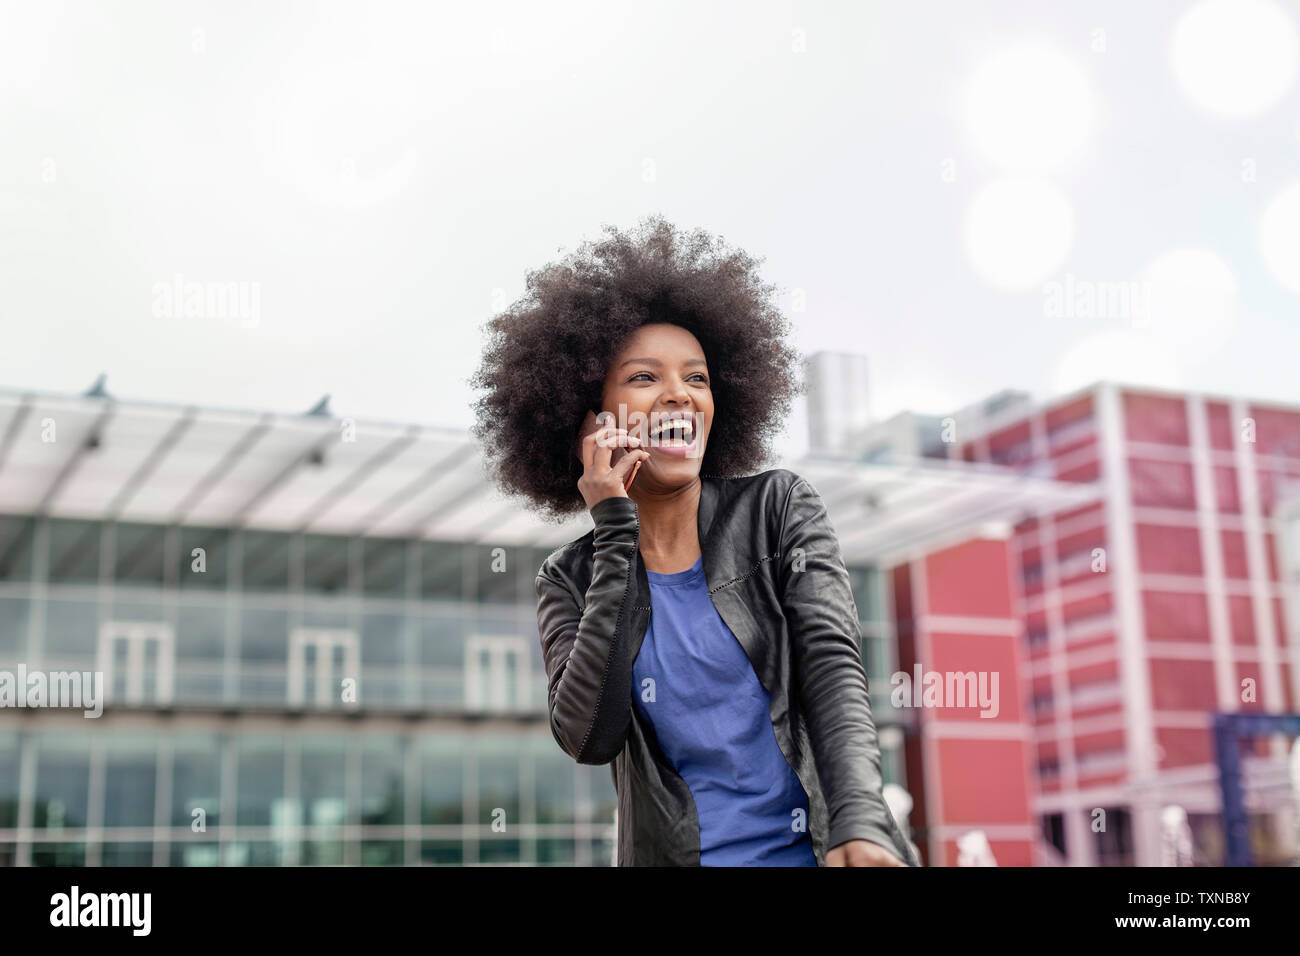 Happy young woman with afro hair in city, laughing and making smartphone call Stock Photo